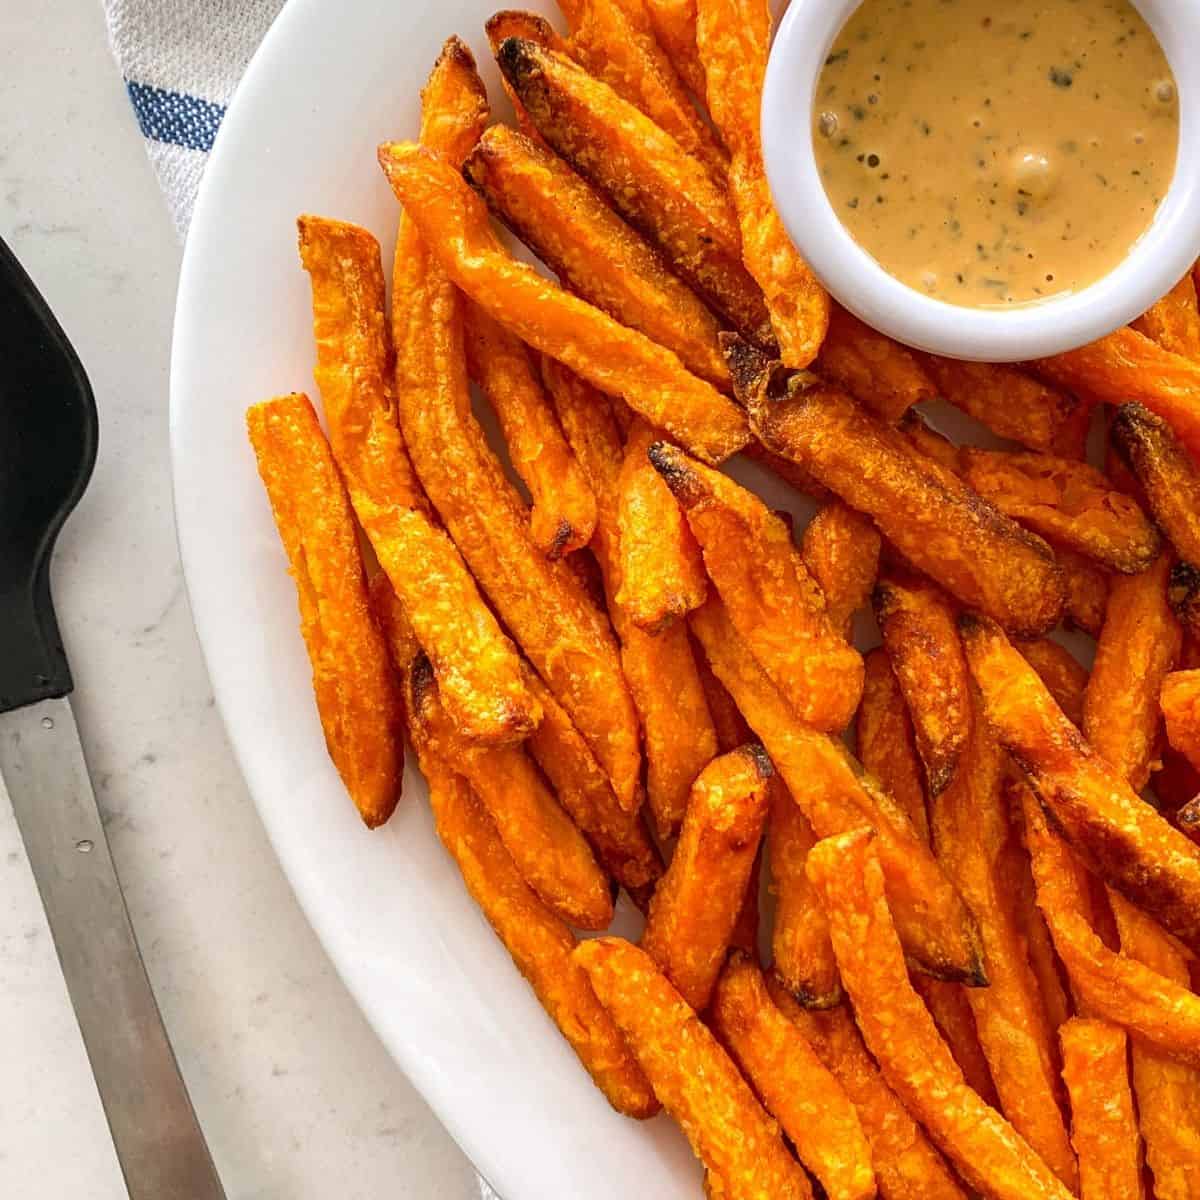 Sweet potato fries in serving dish with orange coloured dip beside them.